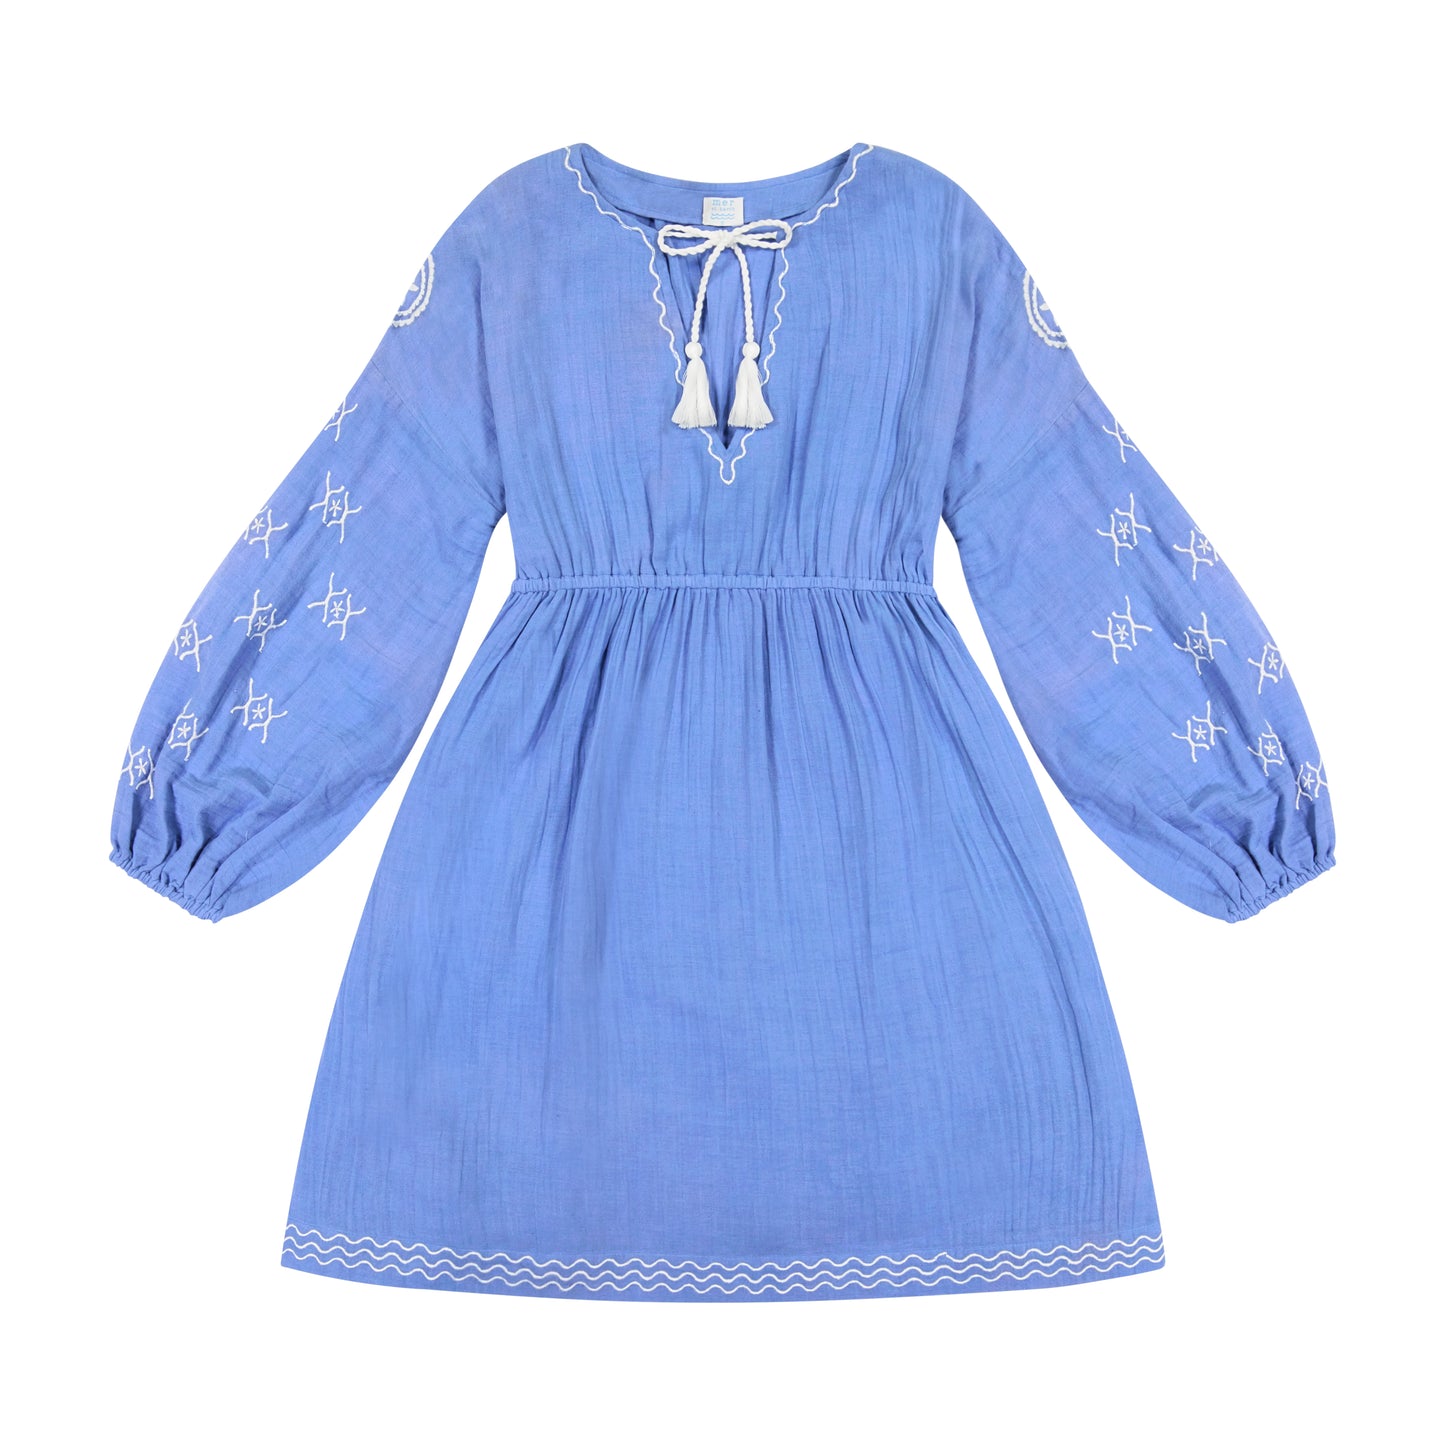 Elodie Women's Popover Embroidery Dress Agean Blue